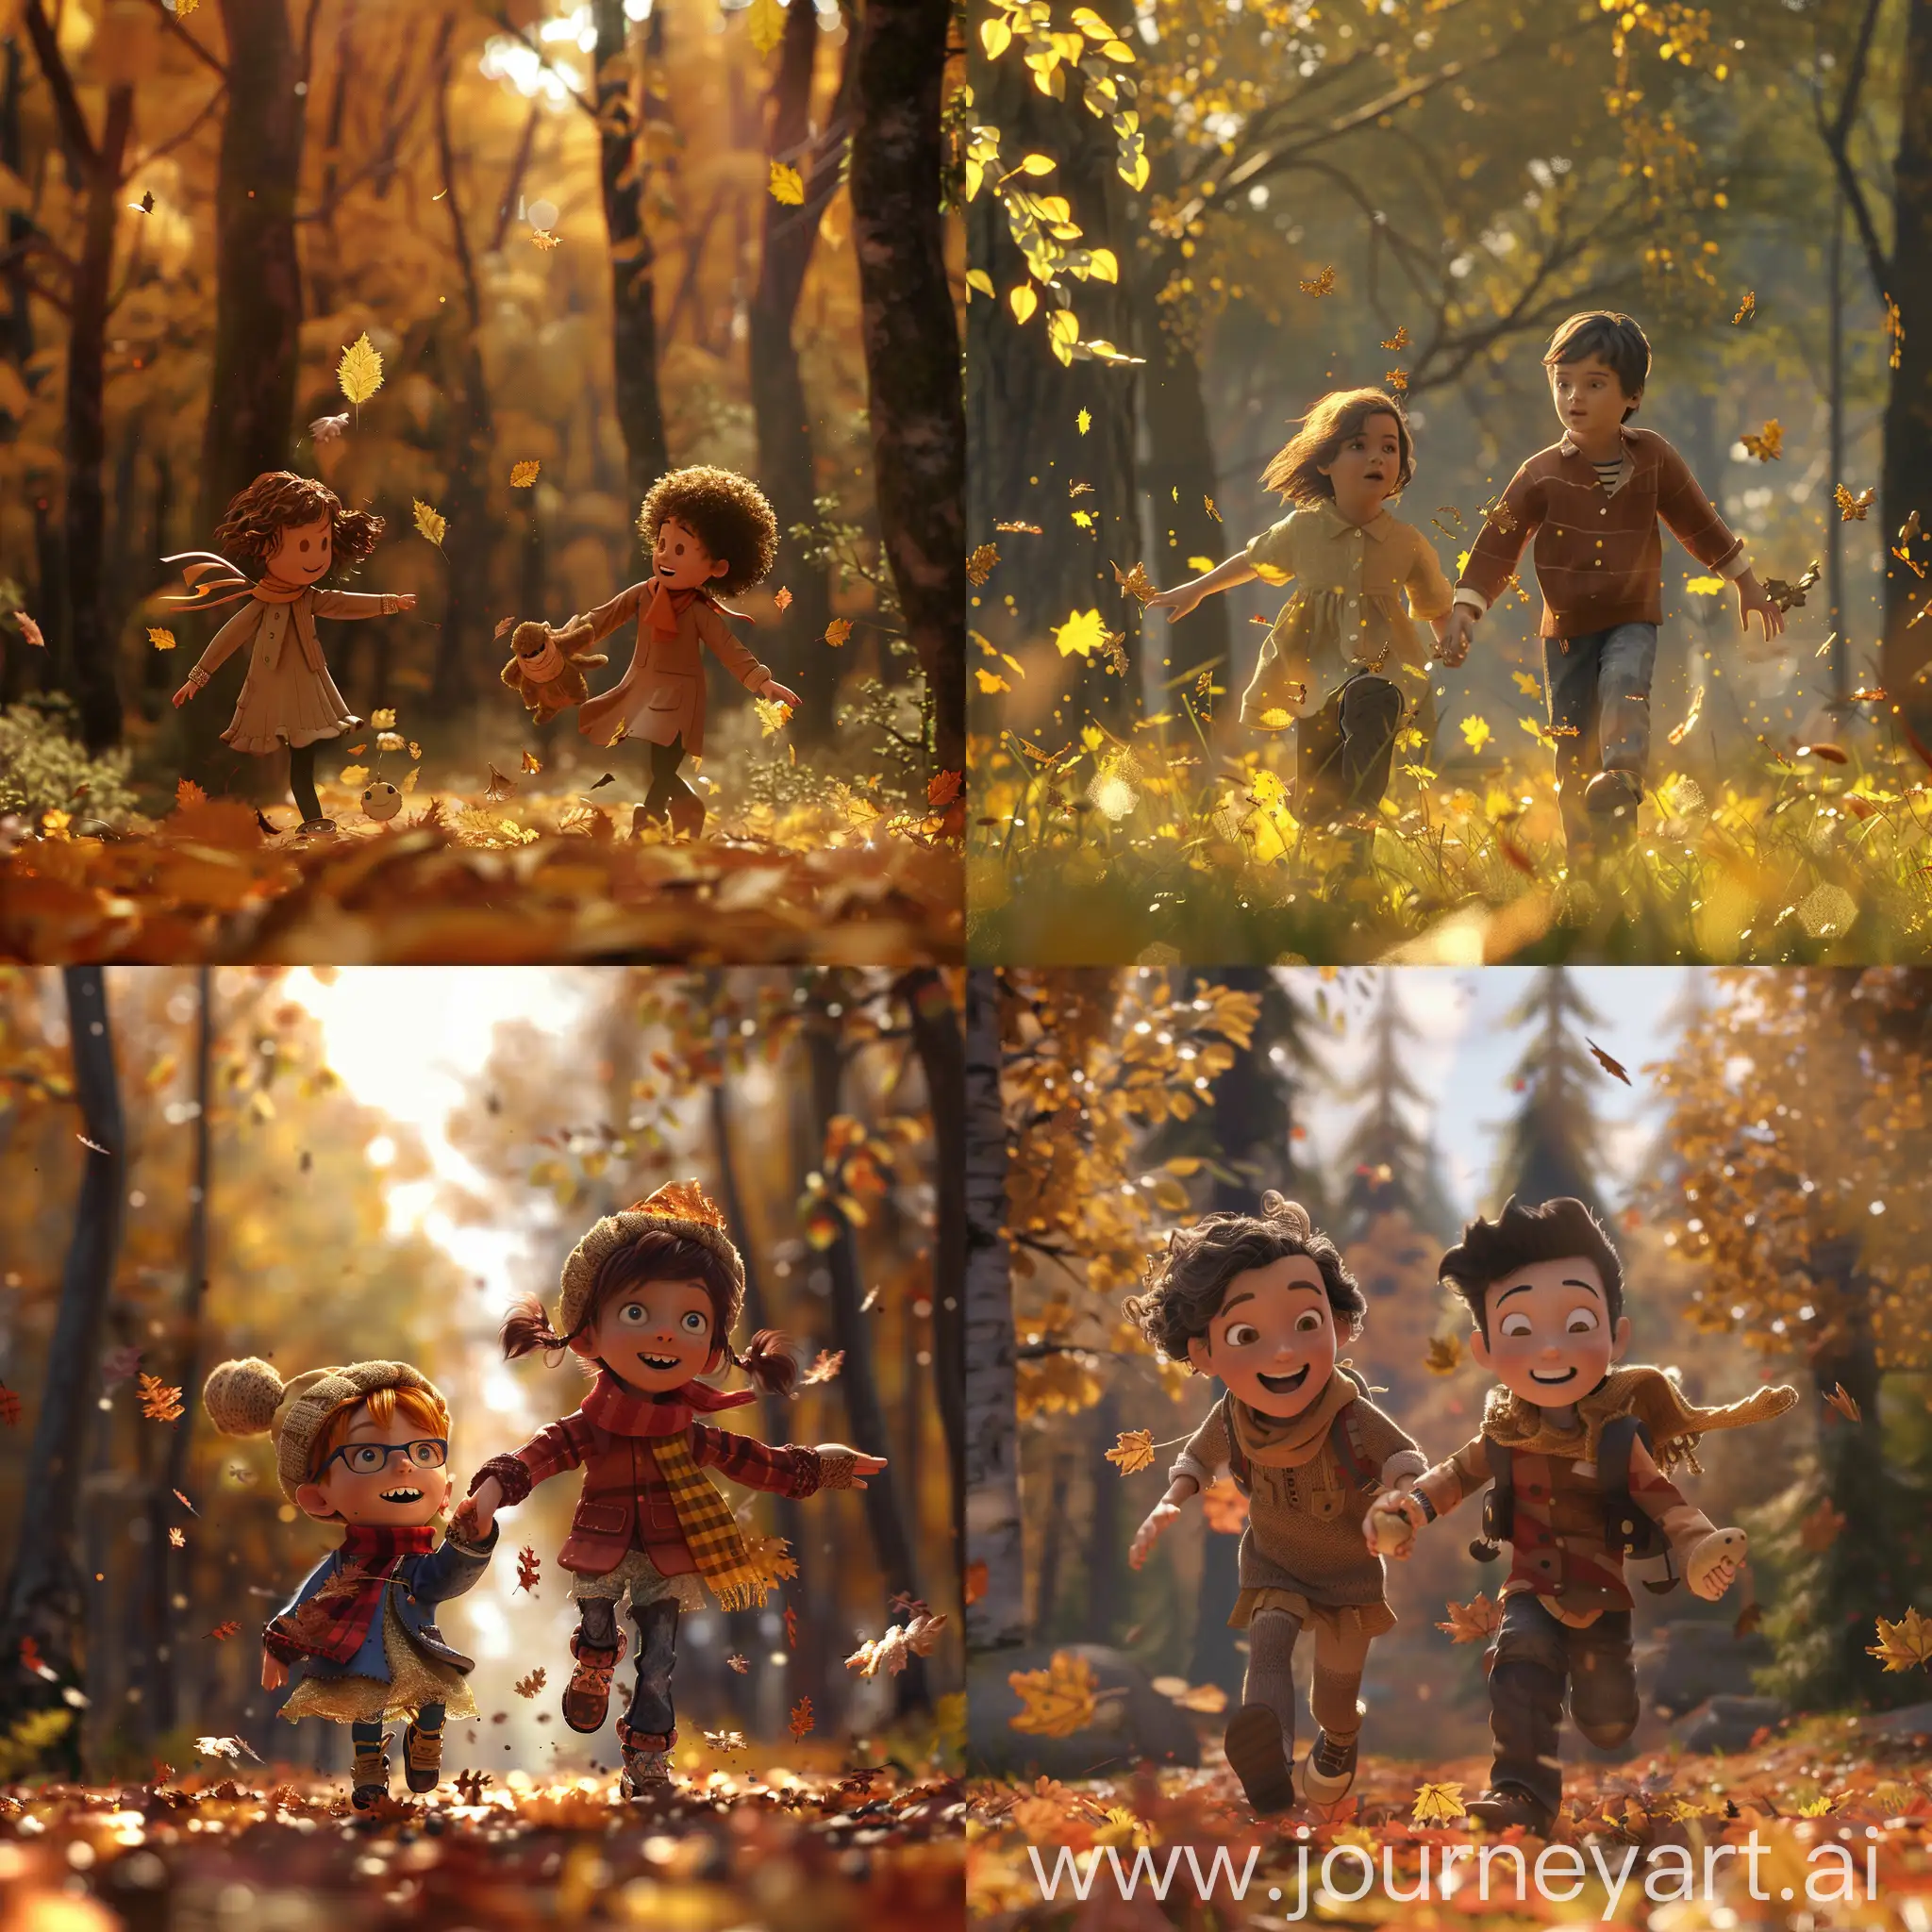 Children-Walking-in-Woods-and-Throwing-Bread-Enchanting-Forest-Adventure-Animation